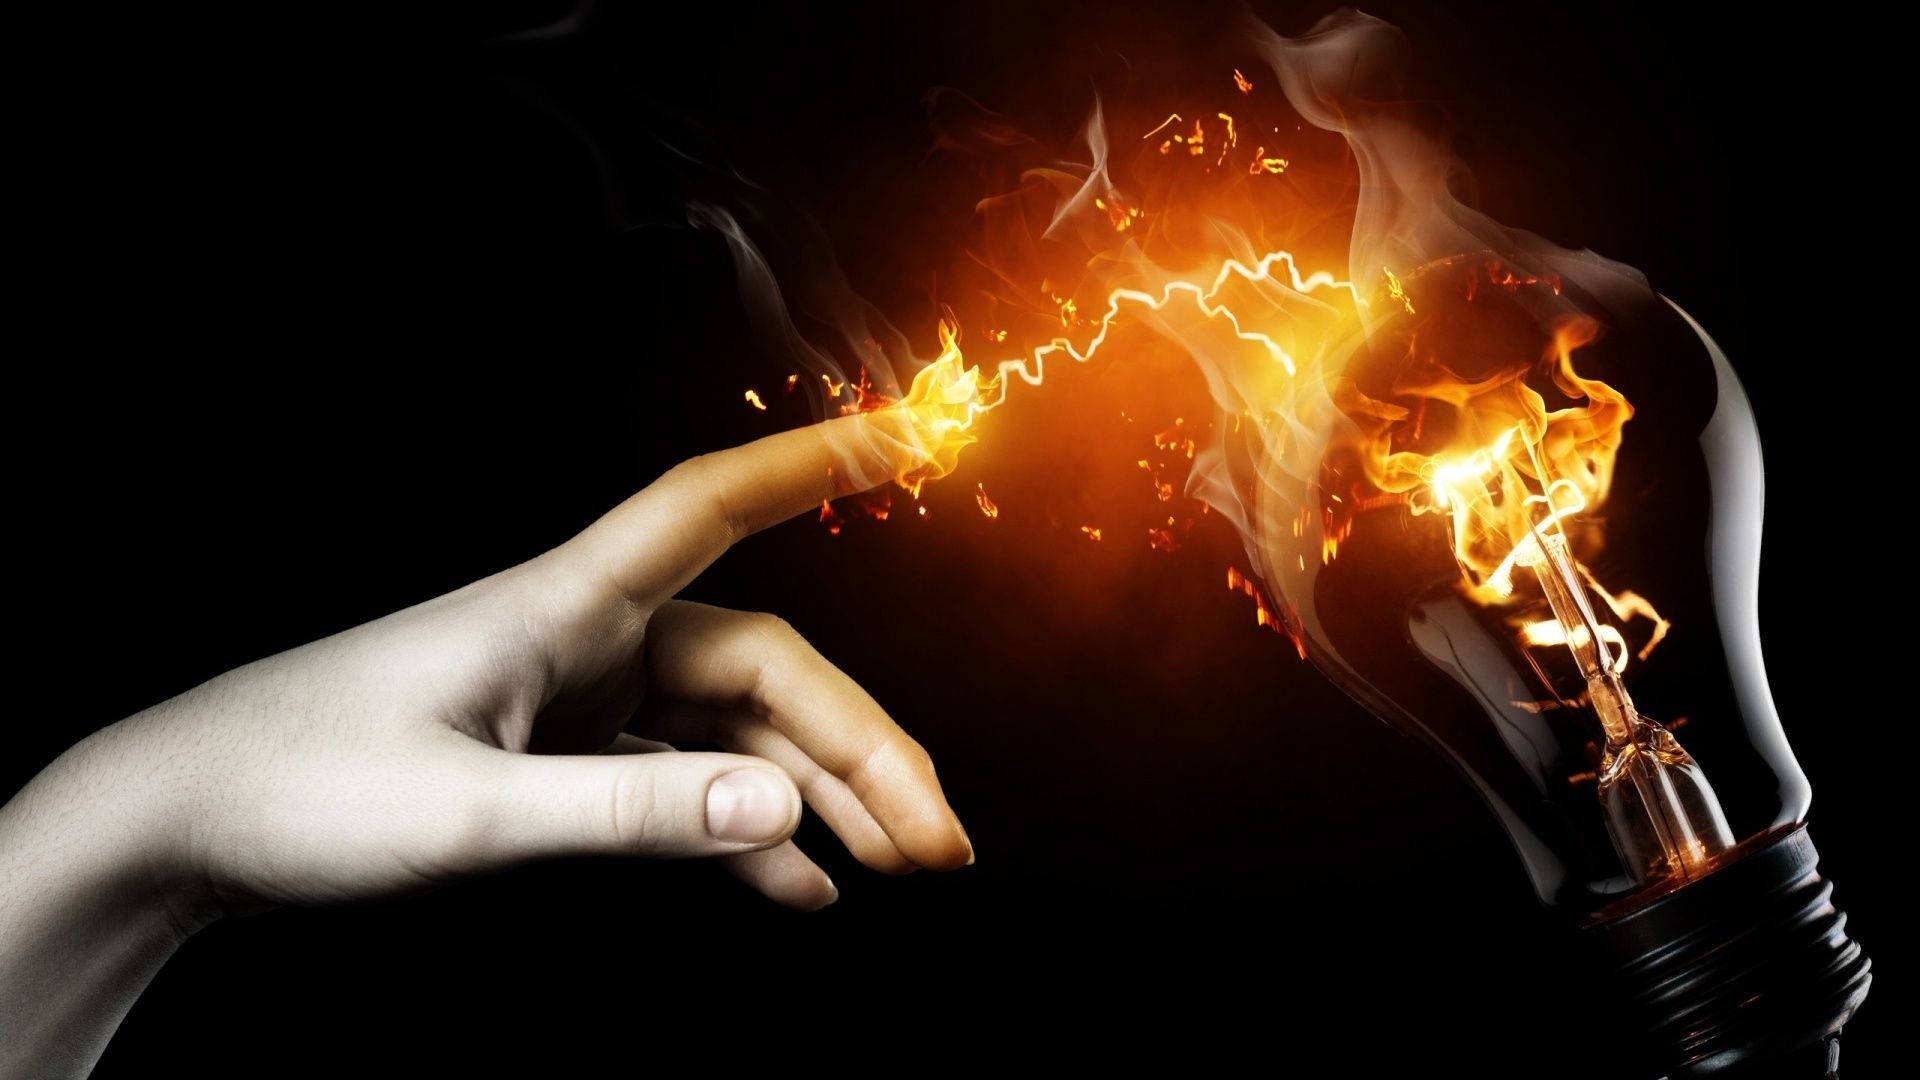 Electricity Striking Fire On Hand Background